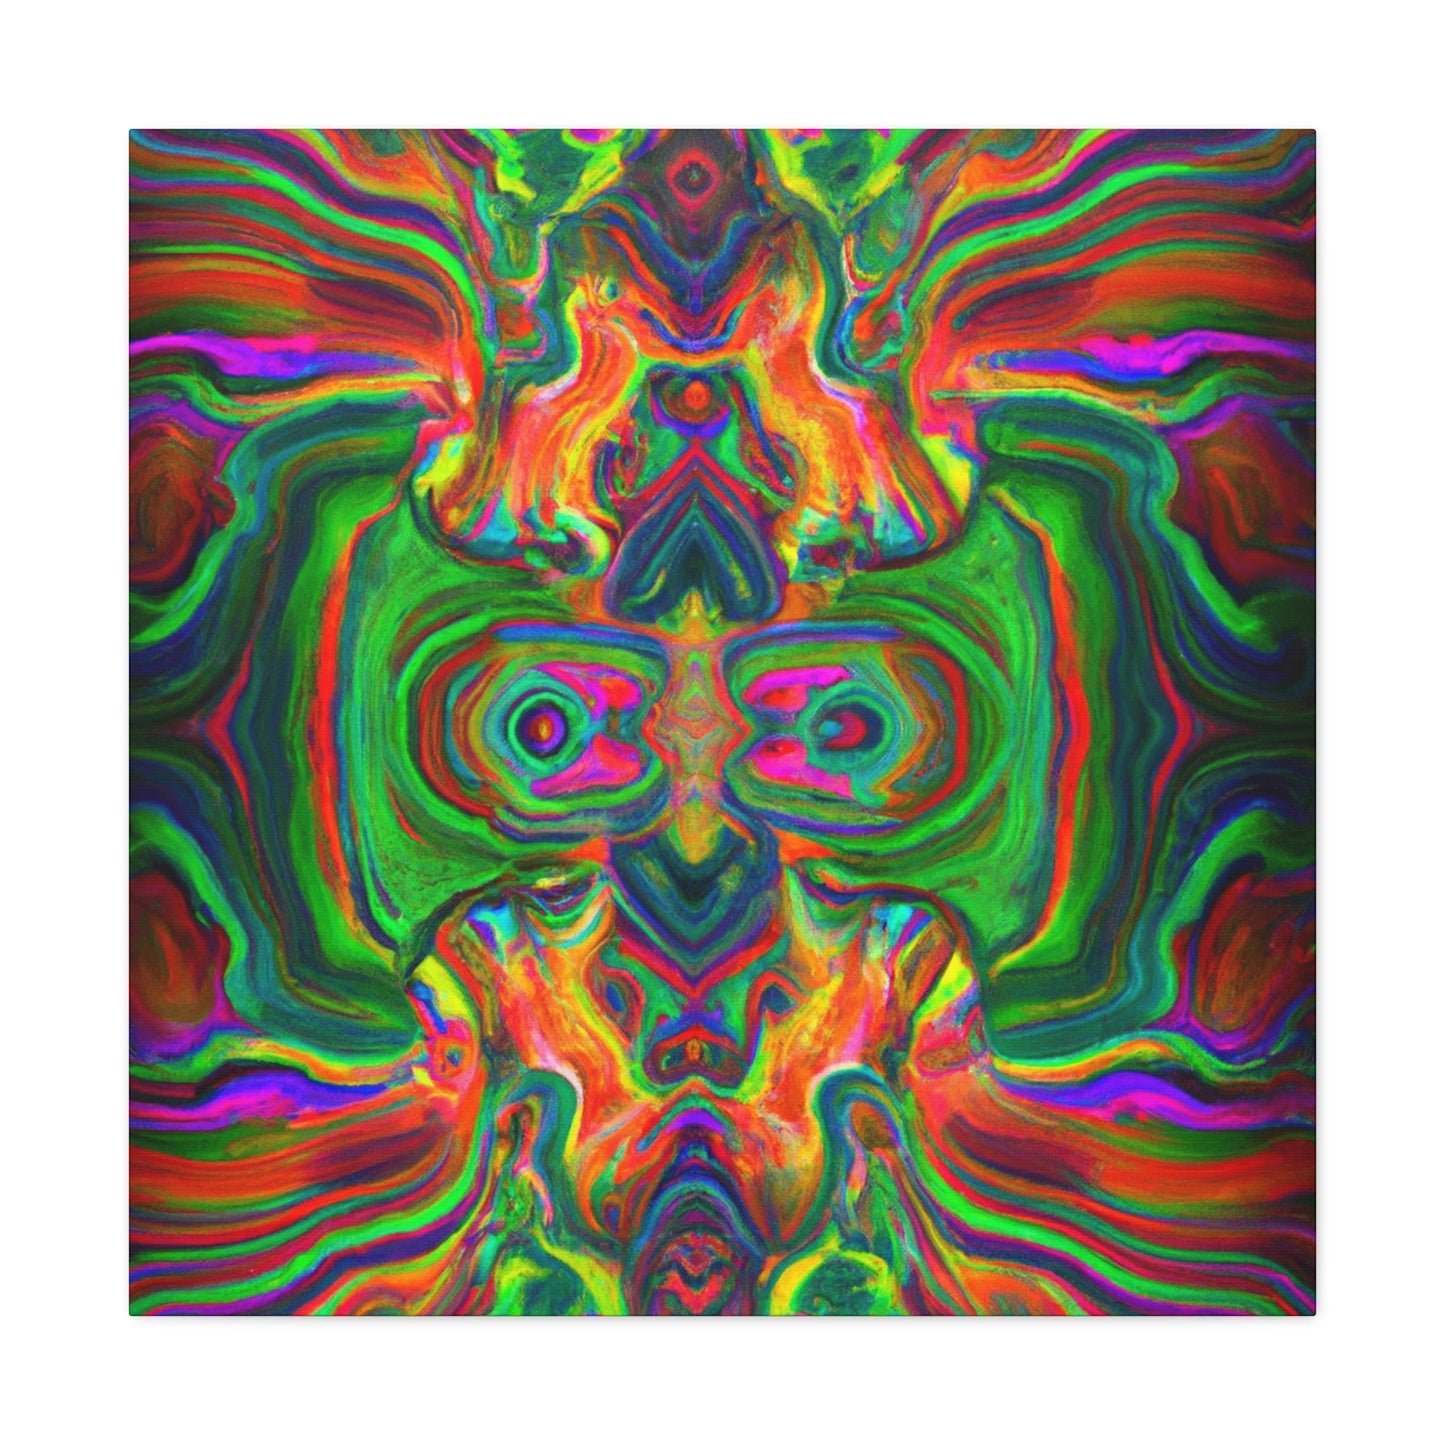 Adelaide Curie - Psychedelic Canvas Wall Art